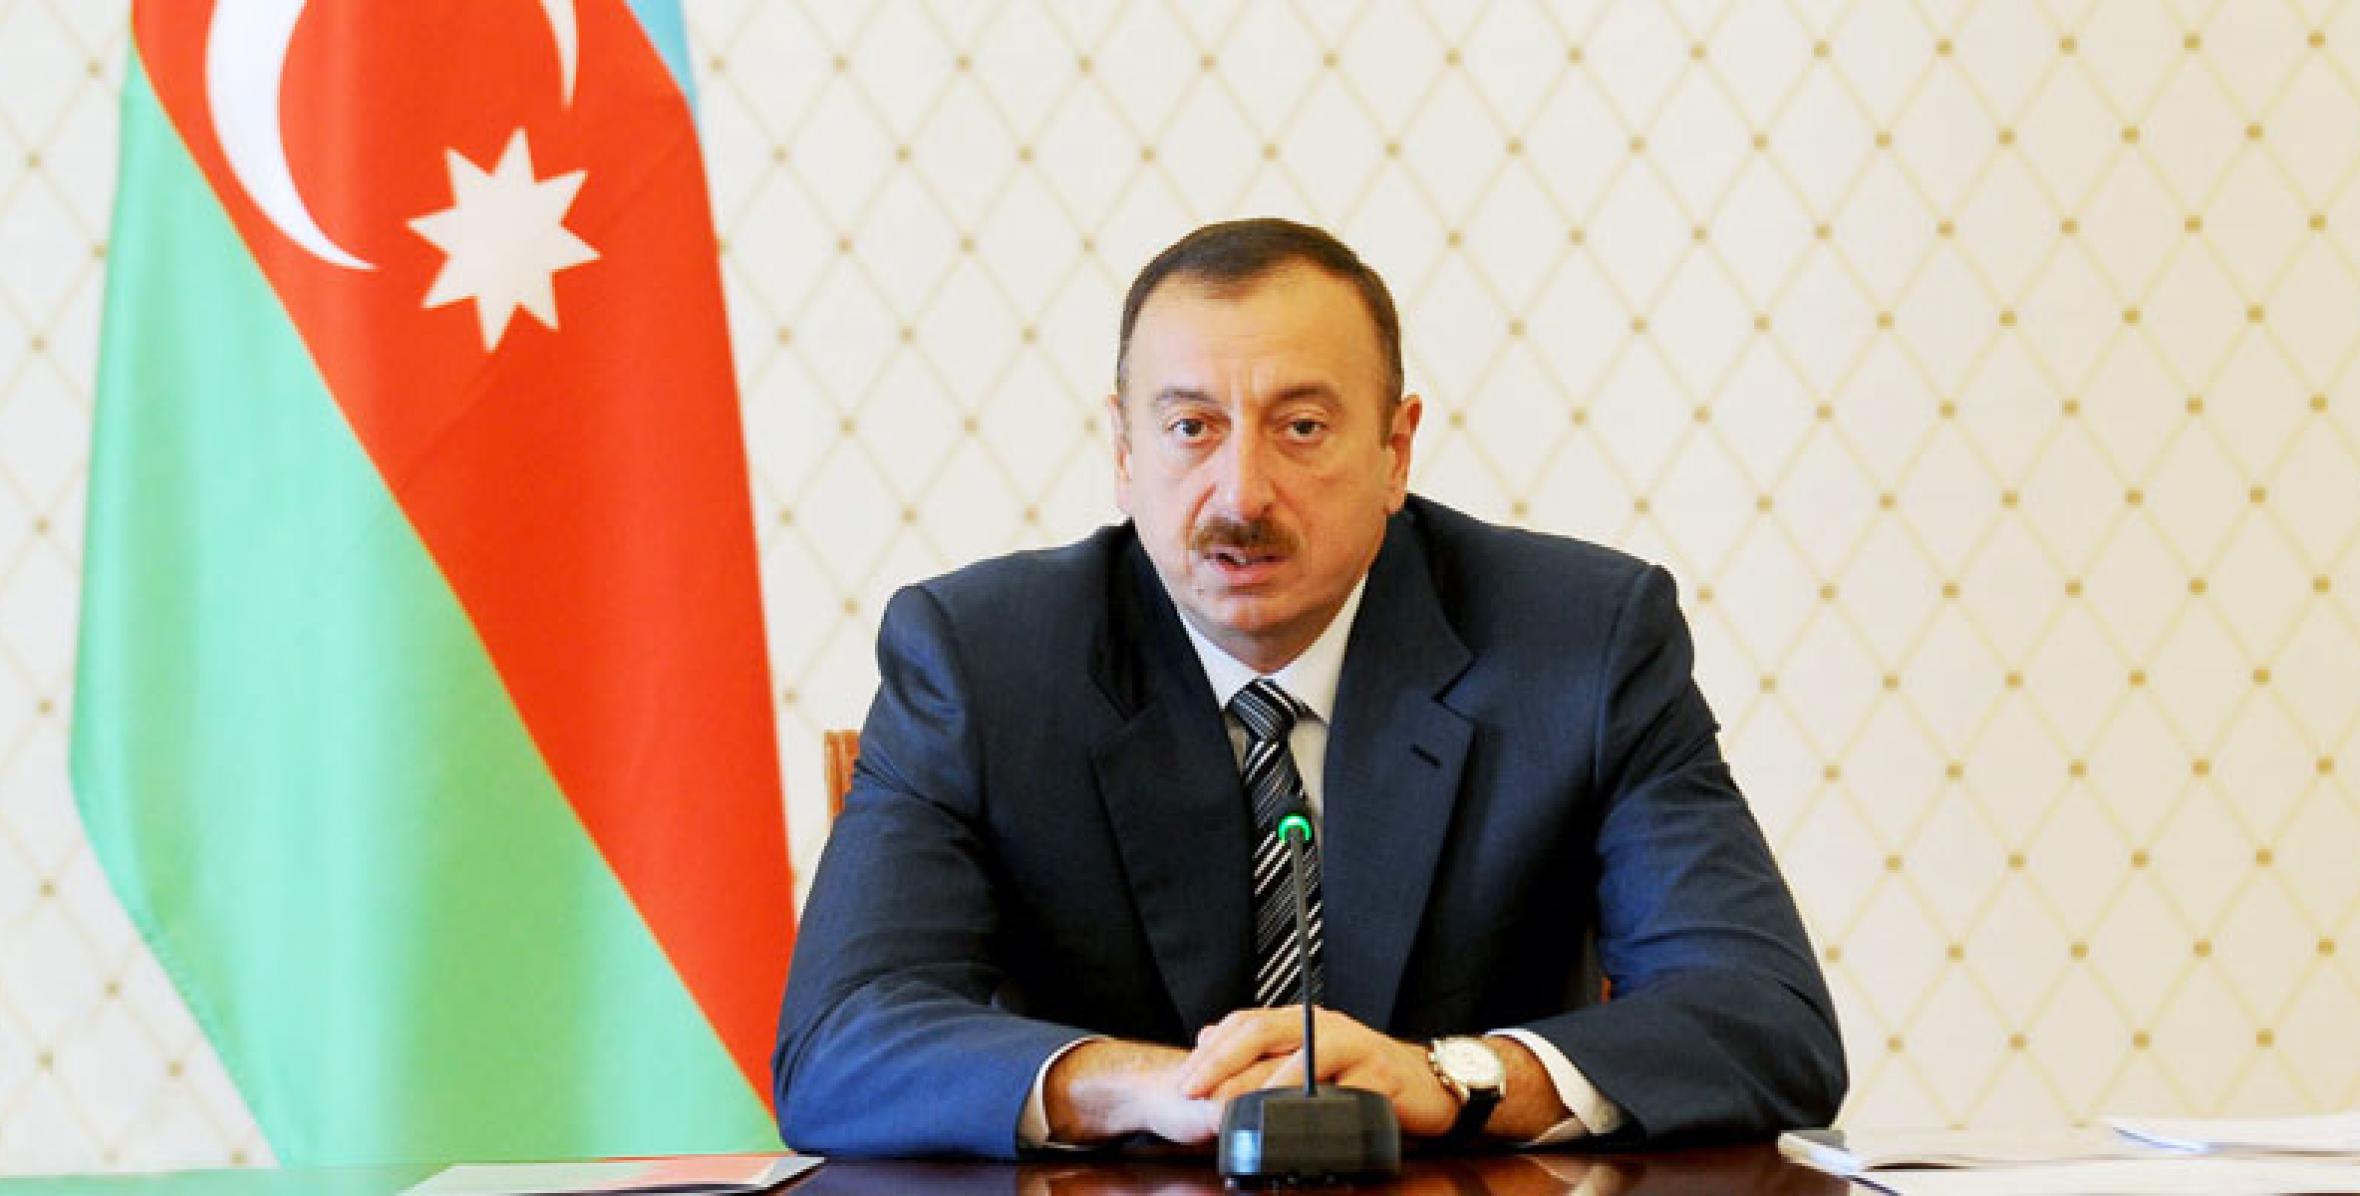 Opening speech by Ilham Aliyev at a meeting dedicated to discussion of prospective development plan of Baku Subway System